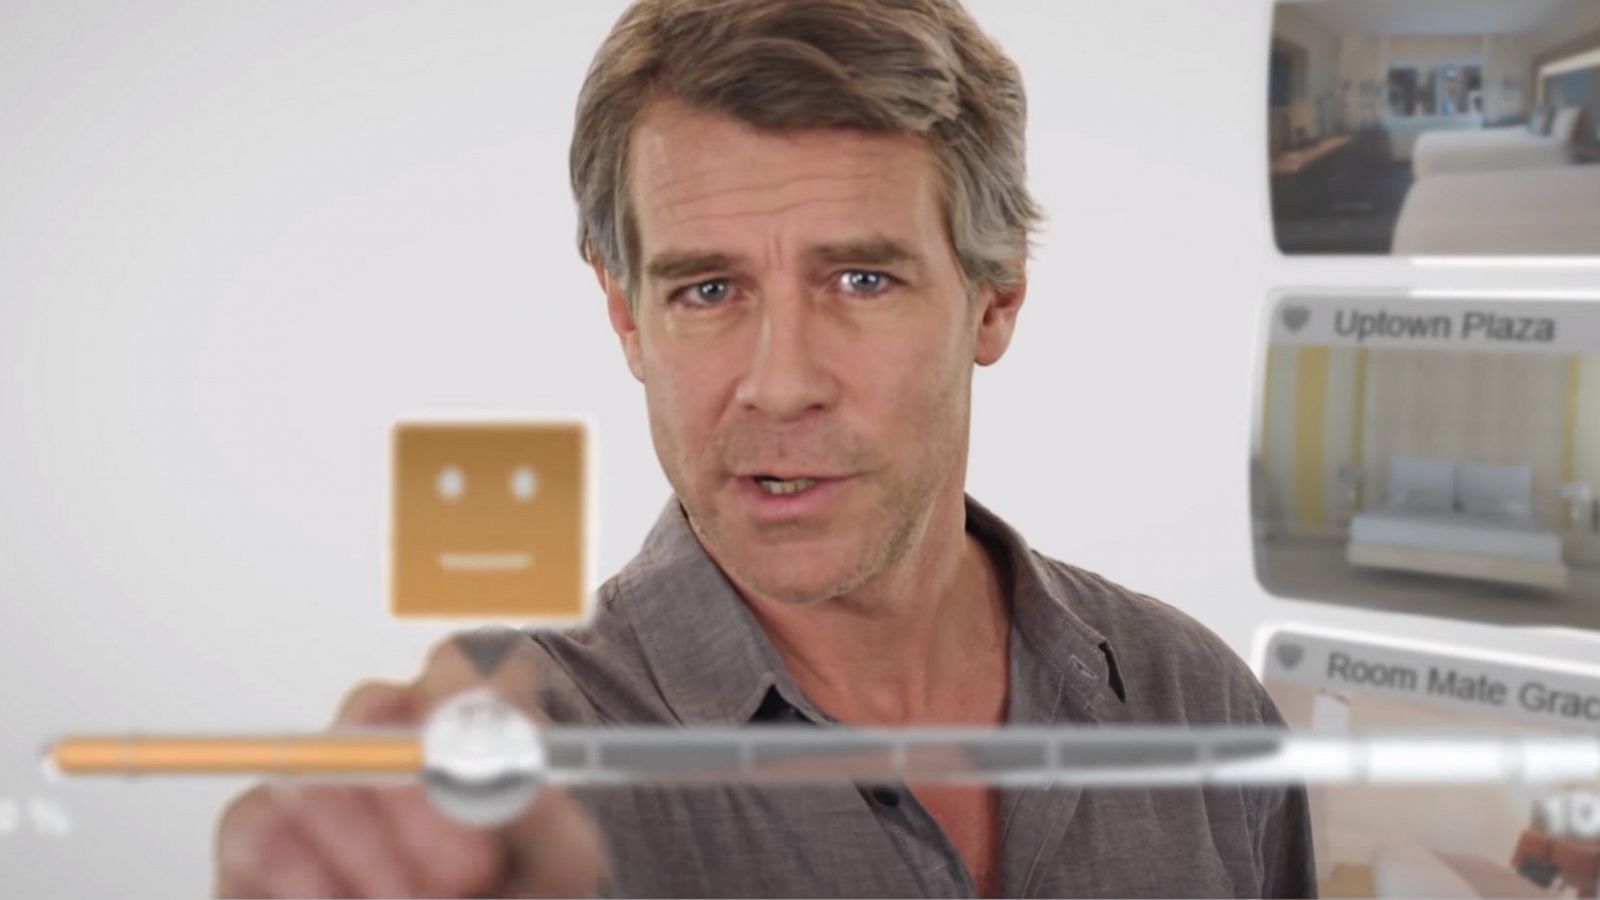 Trivago Guy Actor Tim Williams Charged With Driving While